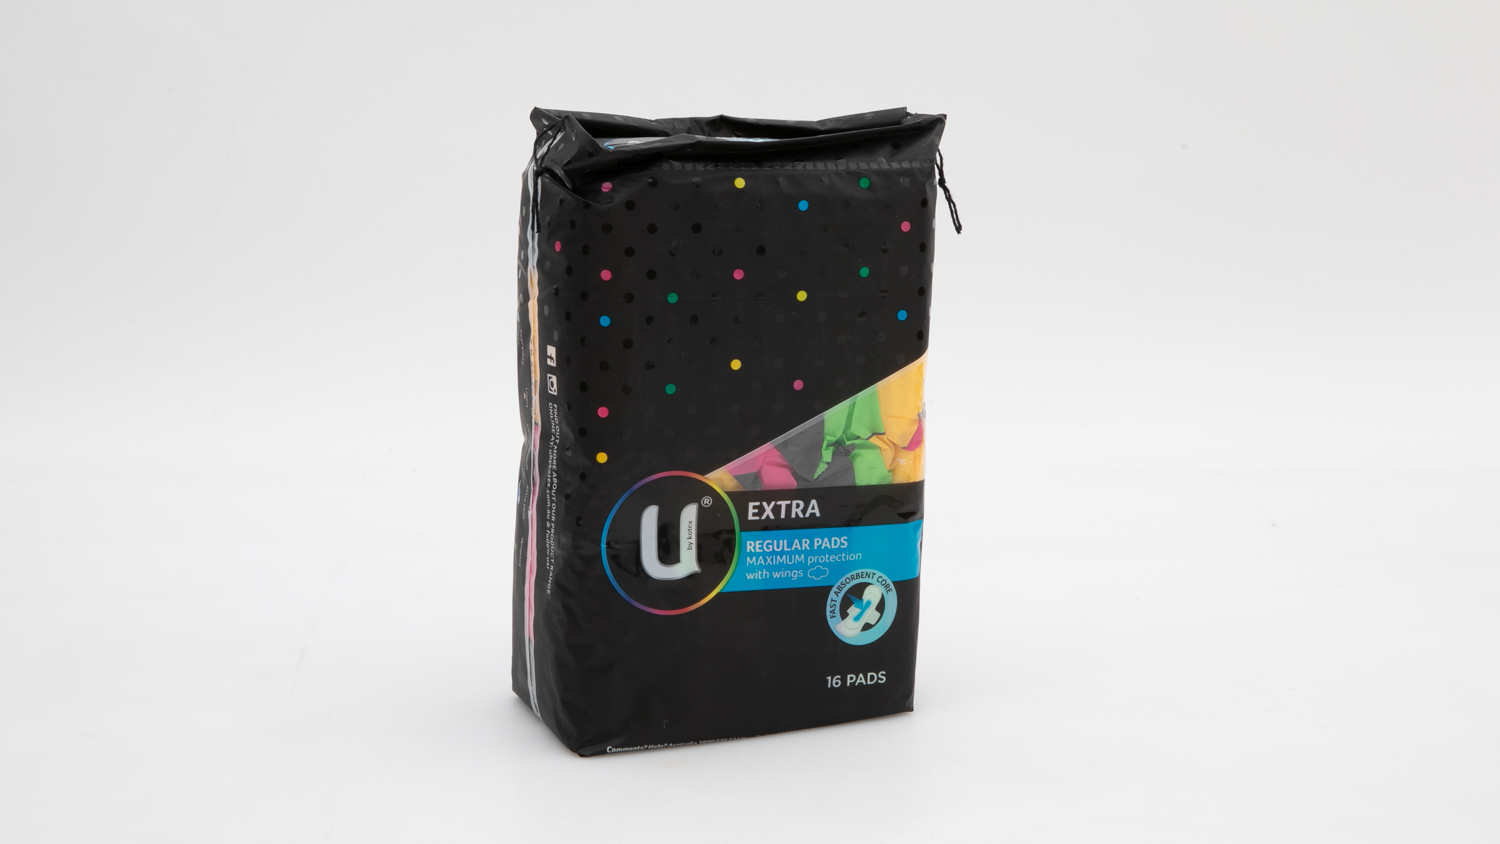 U by Kotex Extra Regular Pads with wings carousel image